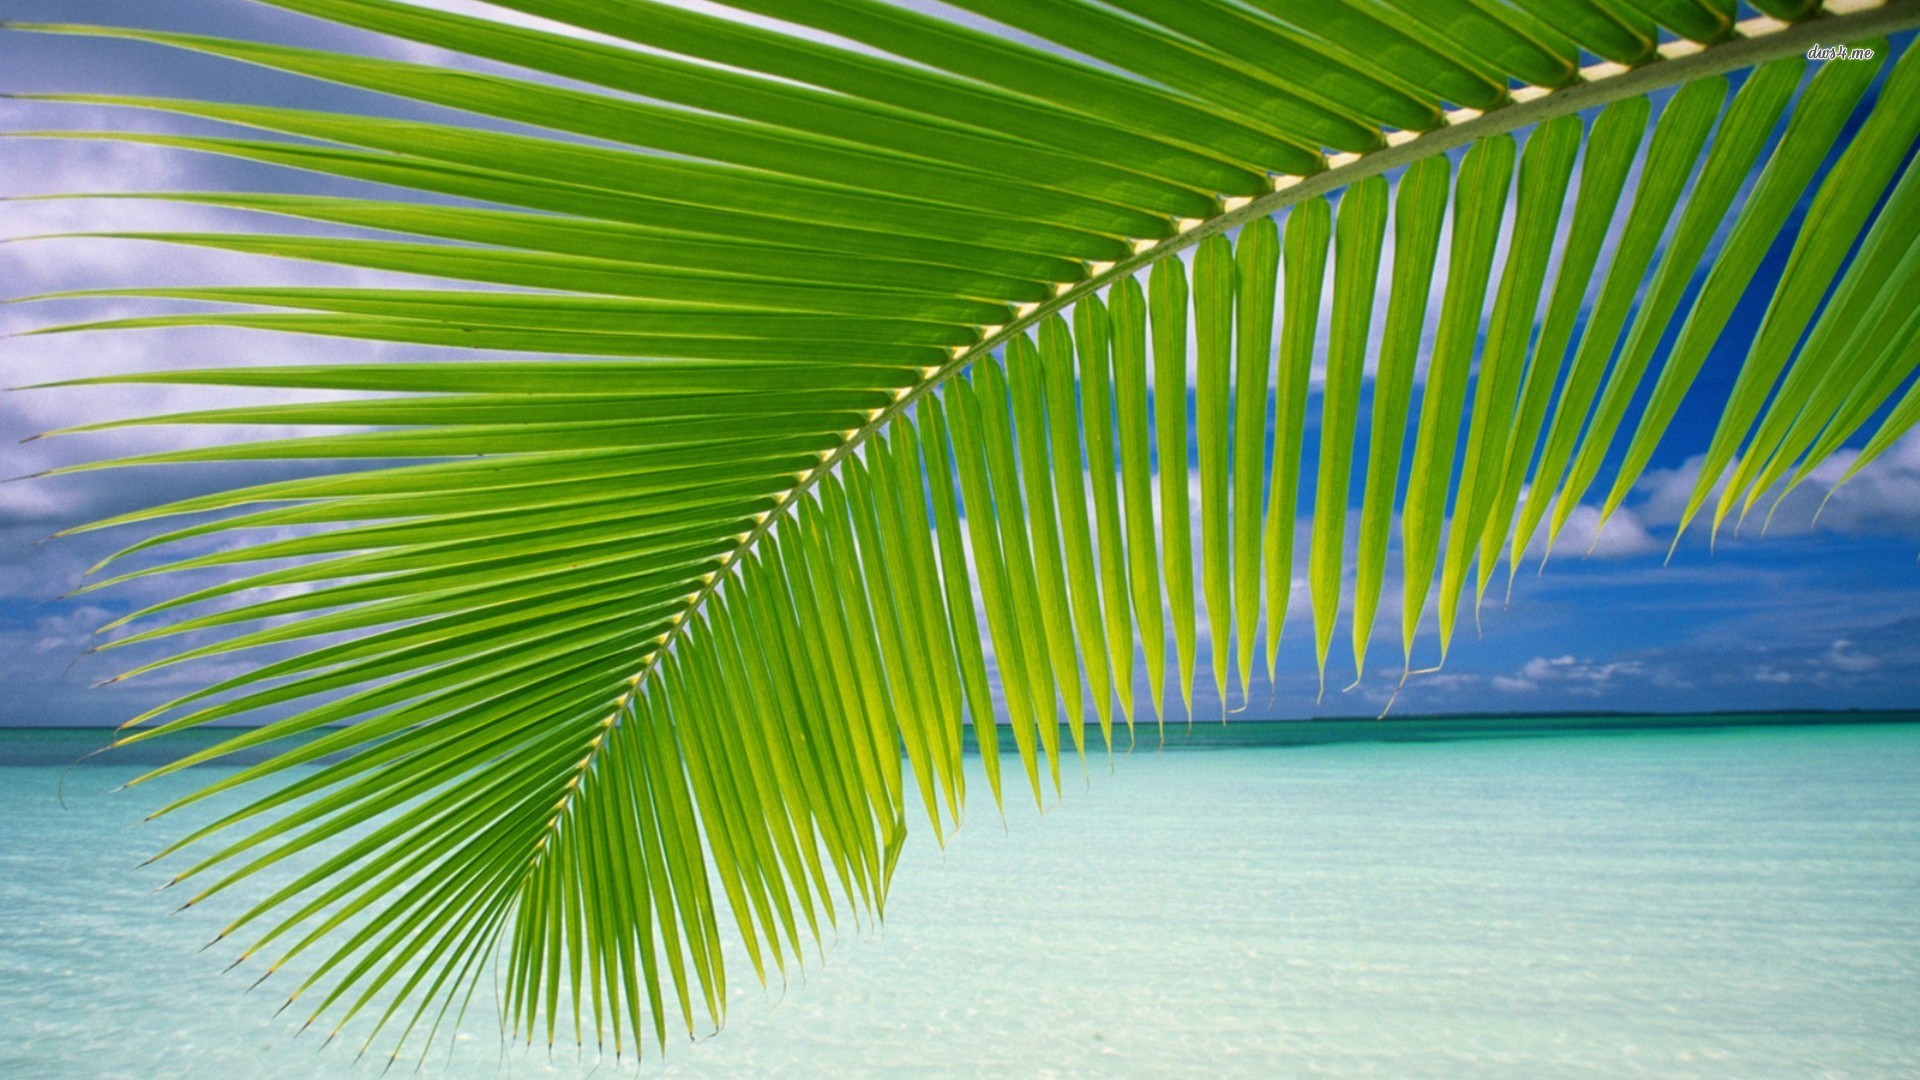 High Resolution Tropical Leaves Hd Wallpapers